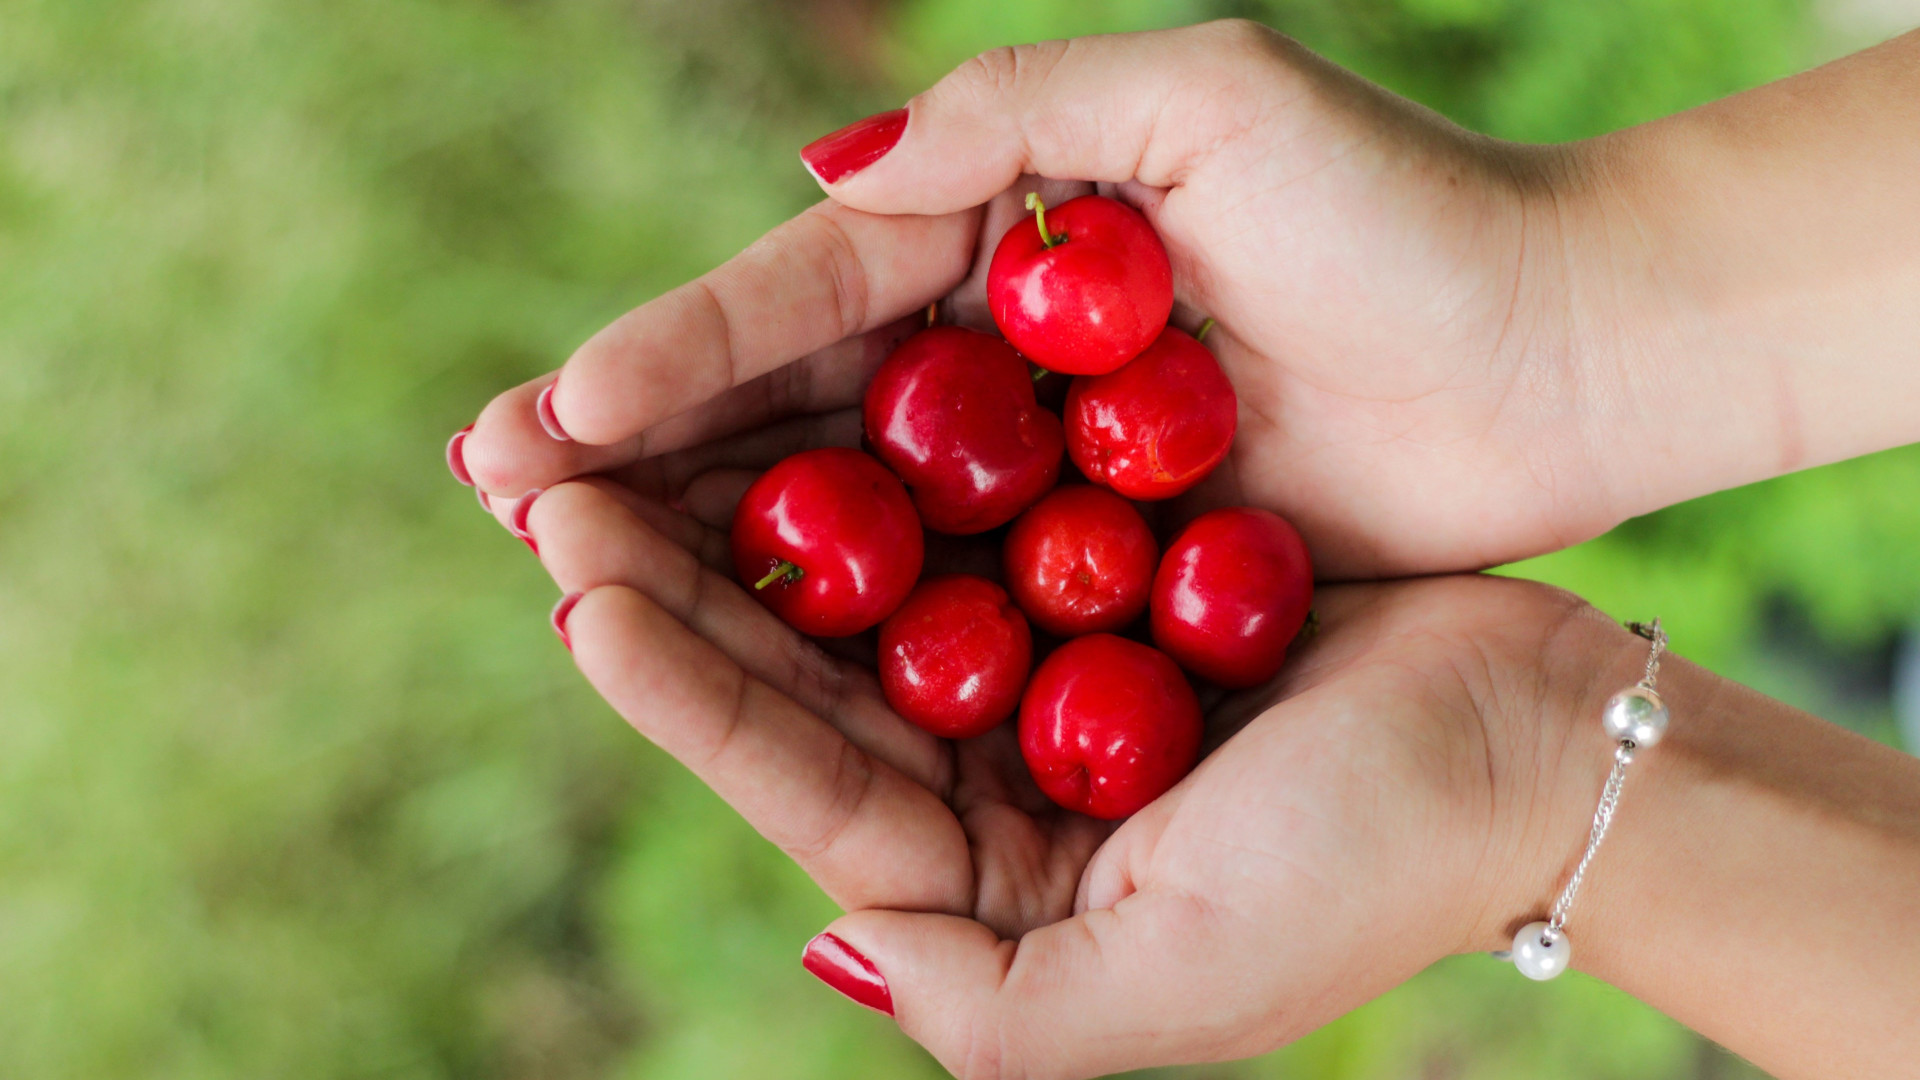 Hands filled with cherries wallpaper 1920x1080